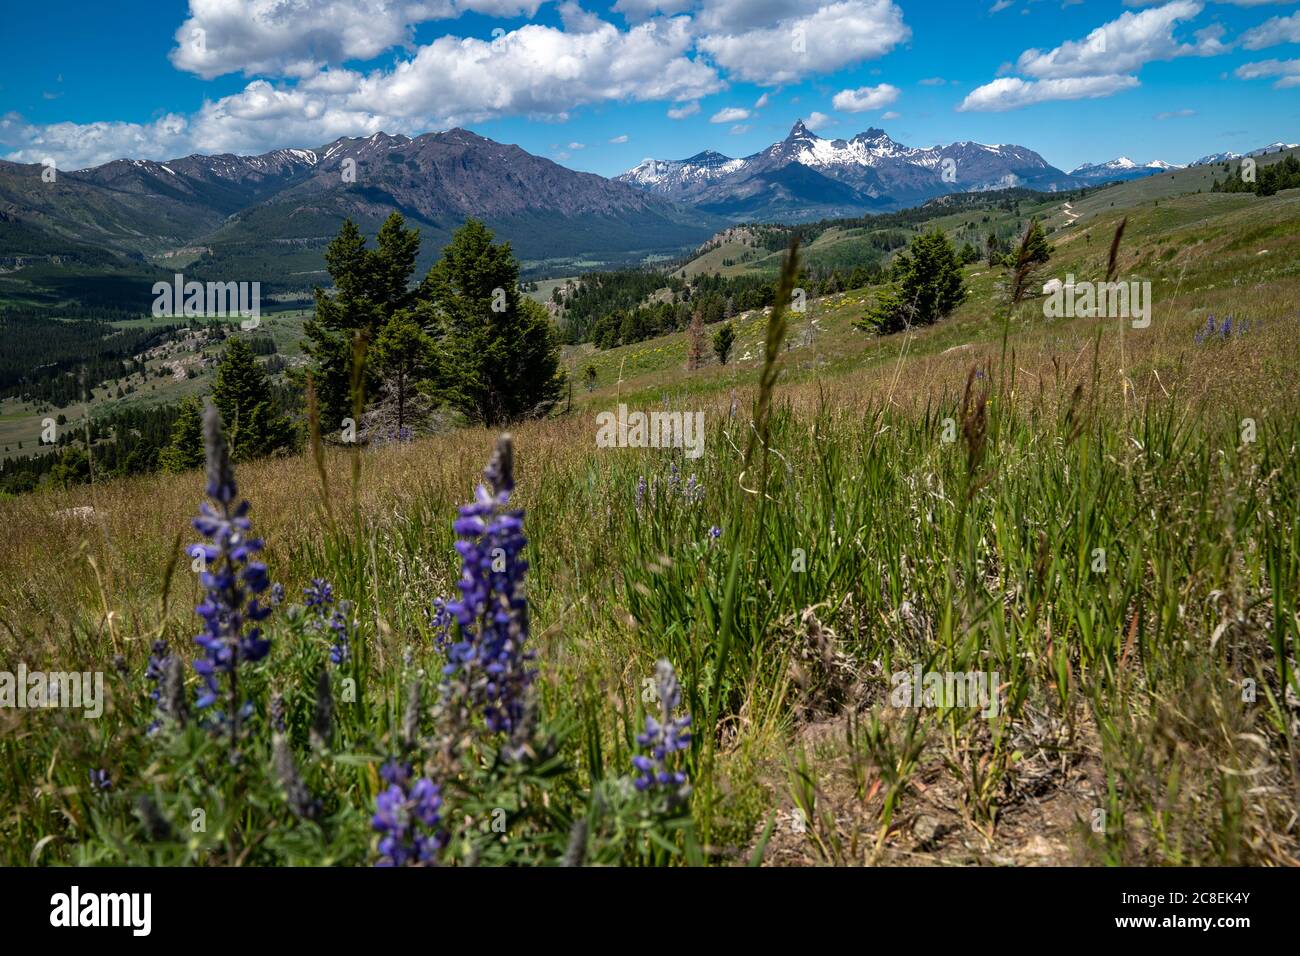 Beautiful Clarks Fork Overlook along the Beartooth Highway in Wyoming and Montana. Lupine in foreground Stock Photo